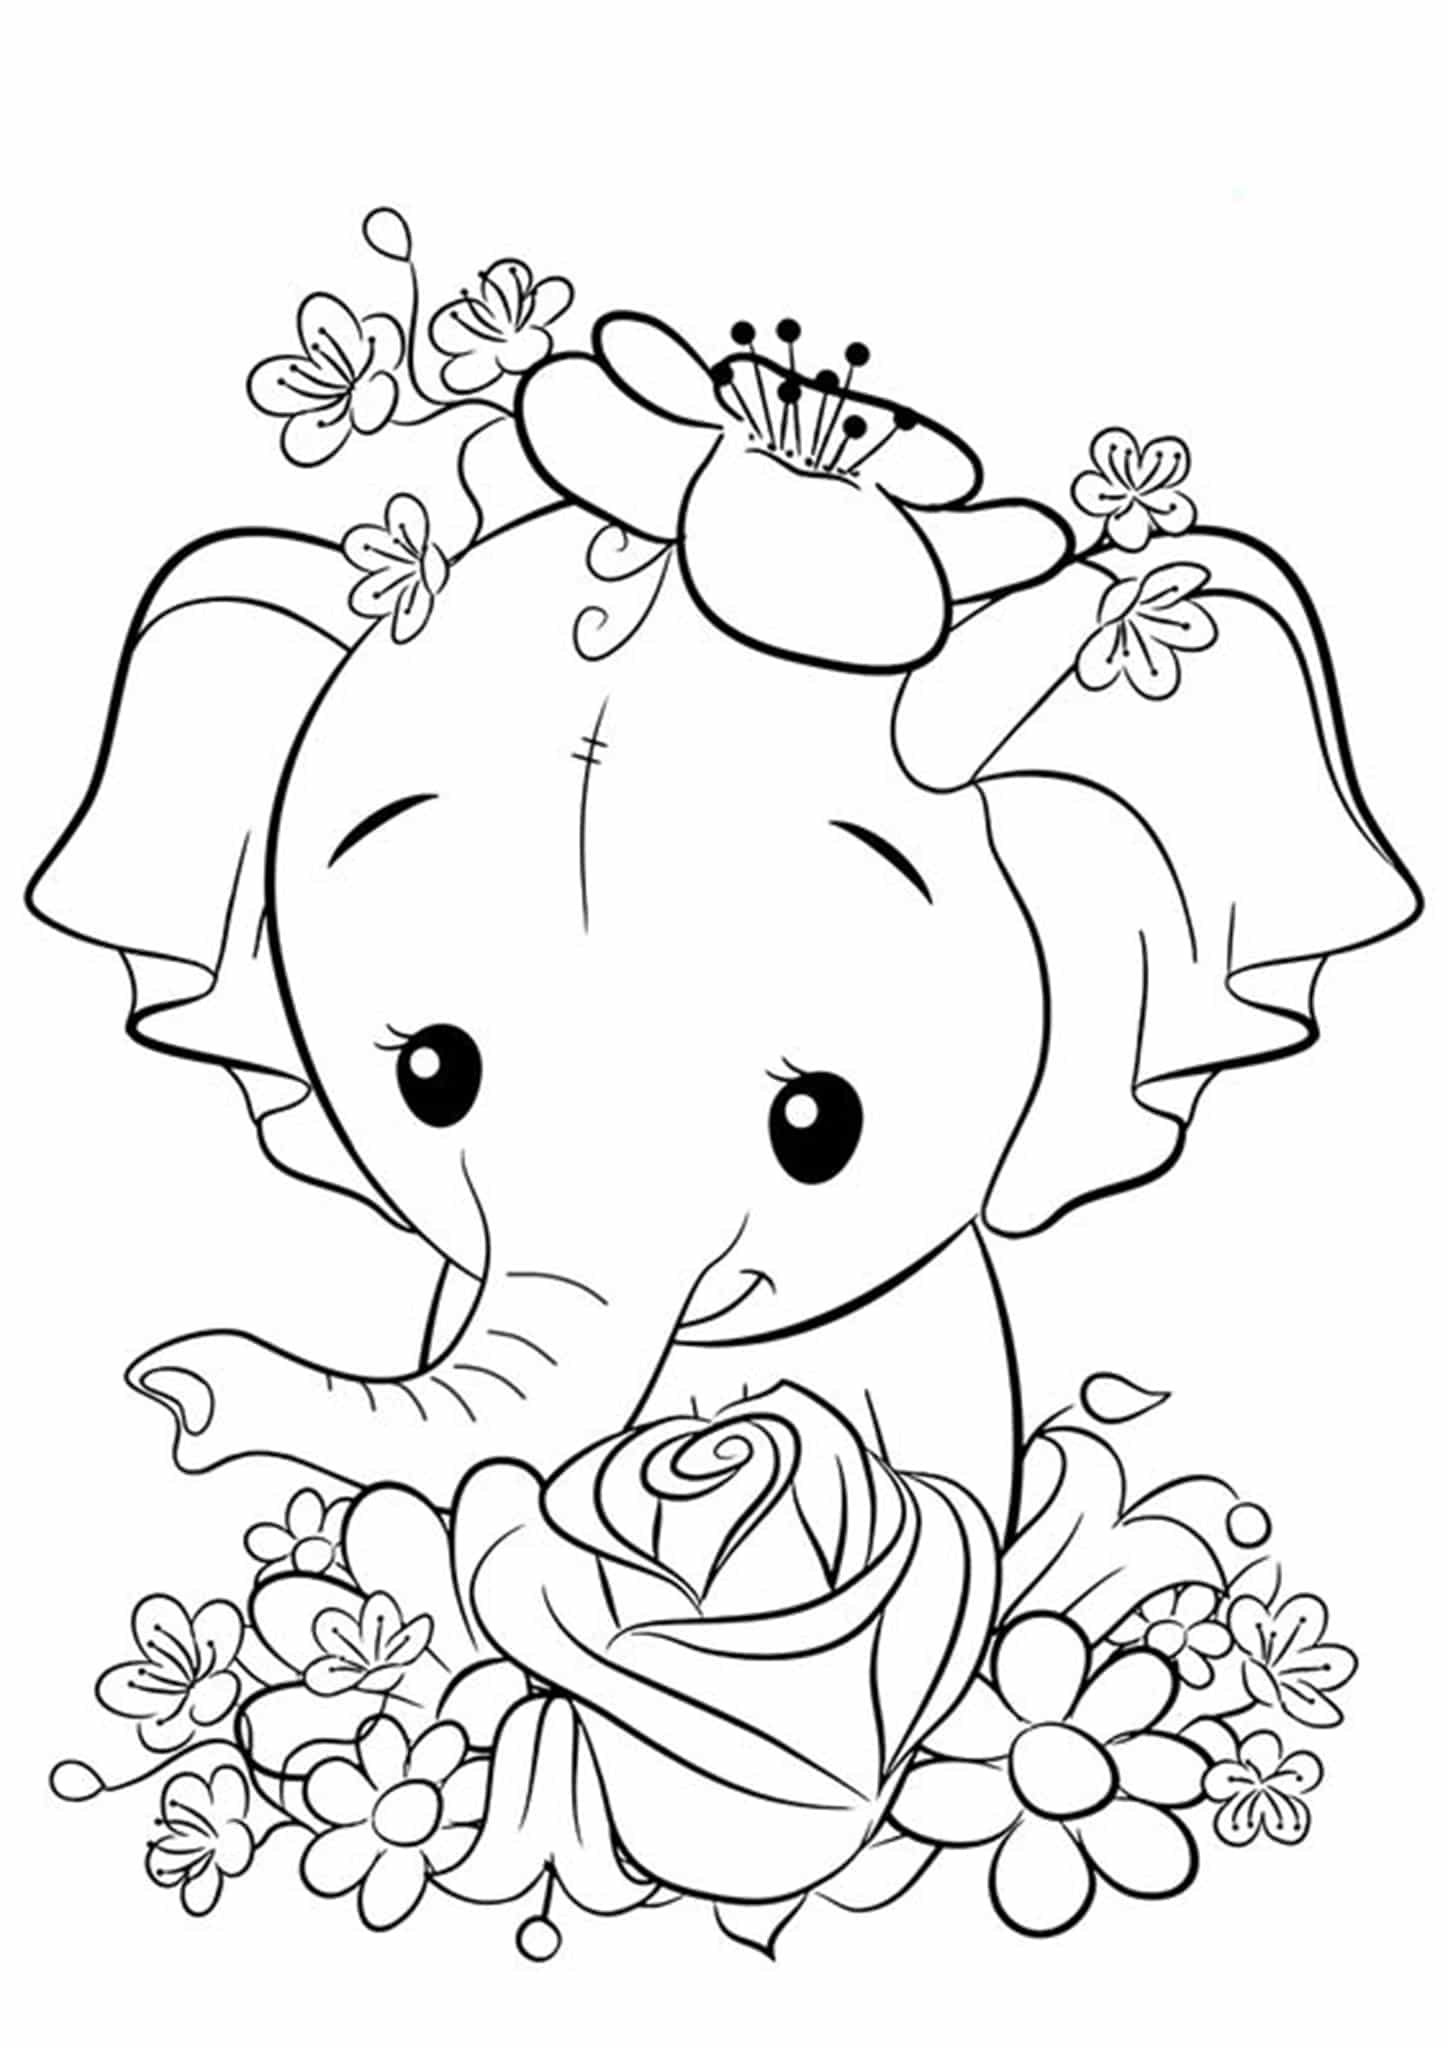 Free & Easy To Print Elephant Coloring Pages   Tulamama